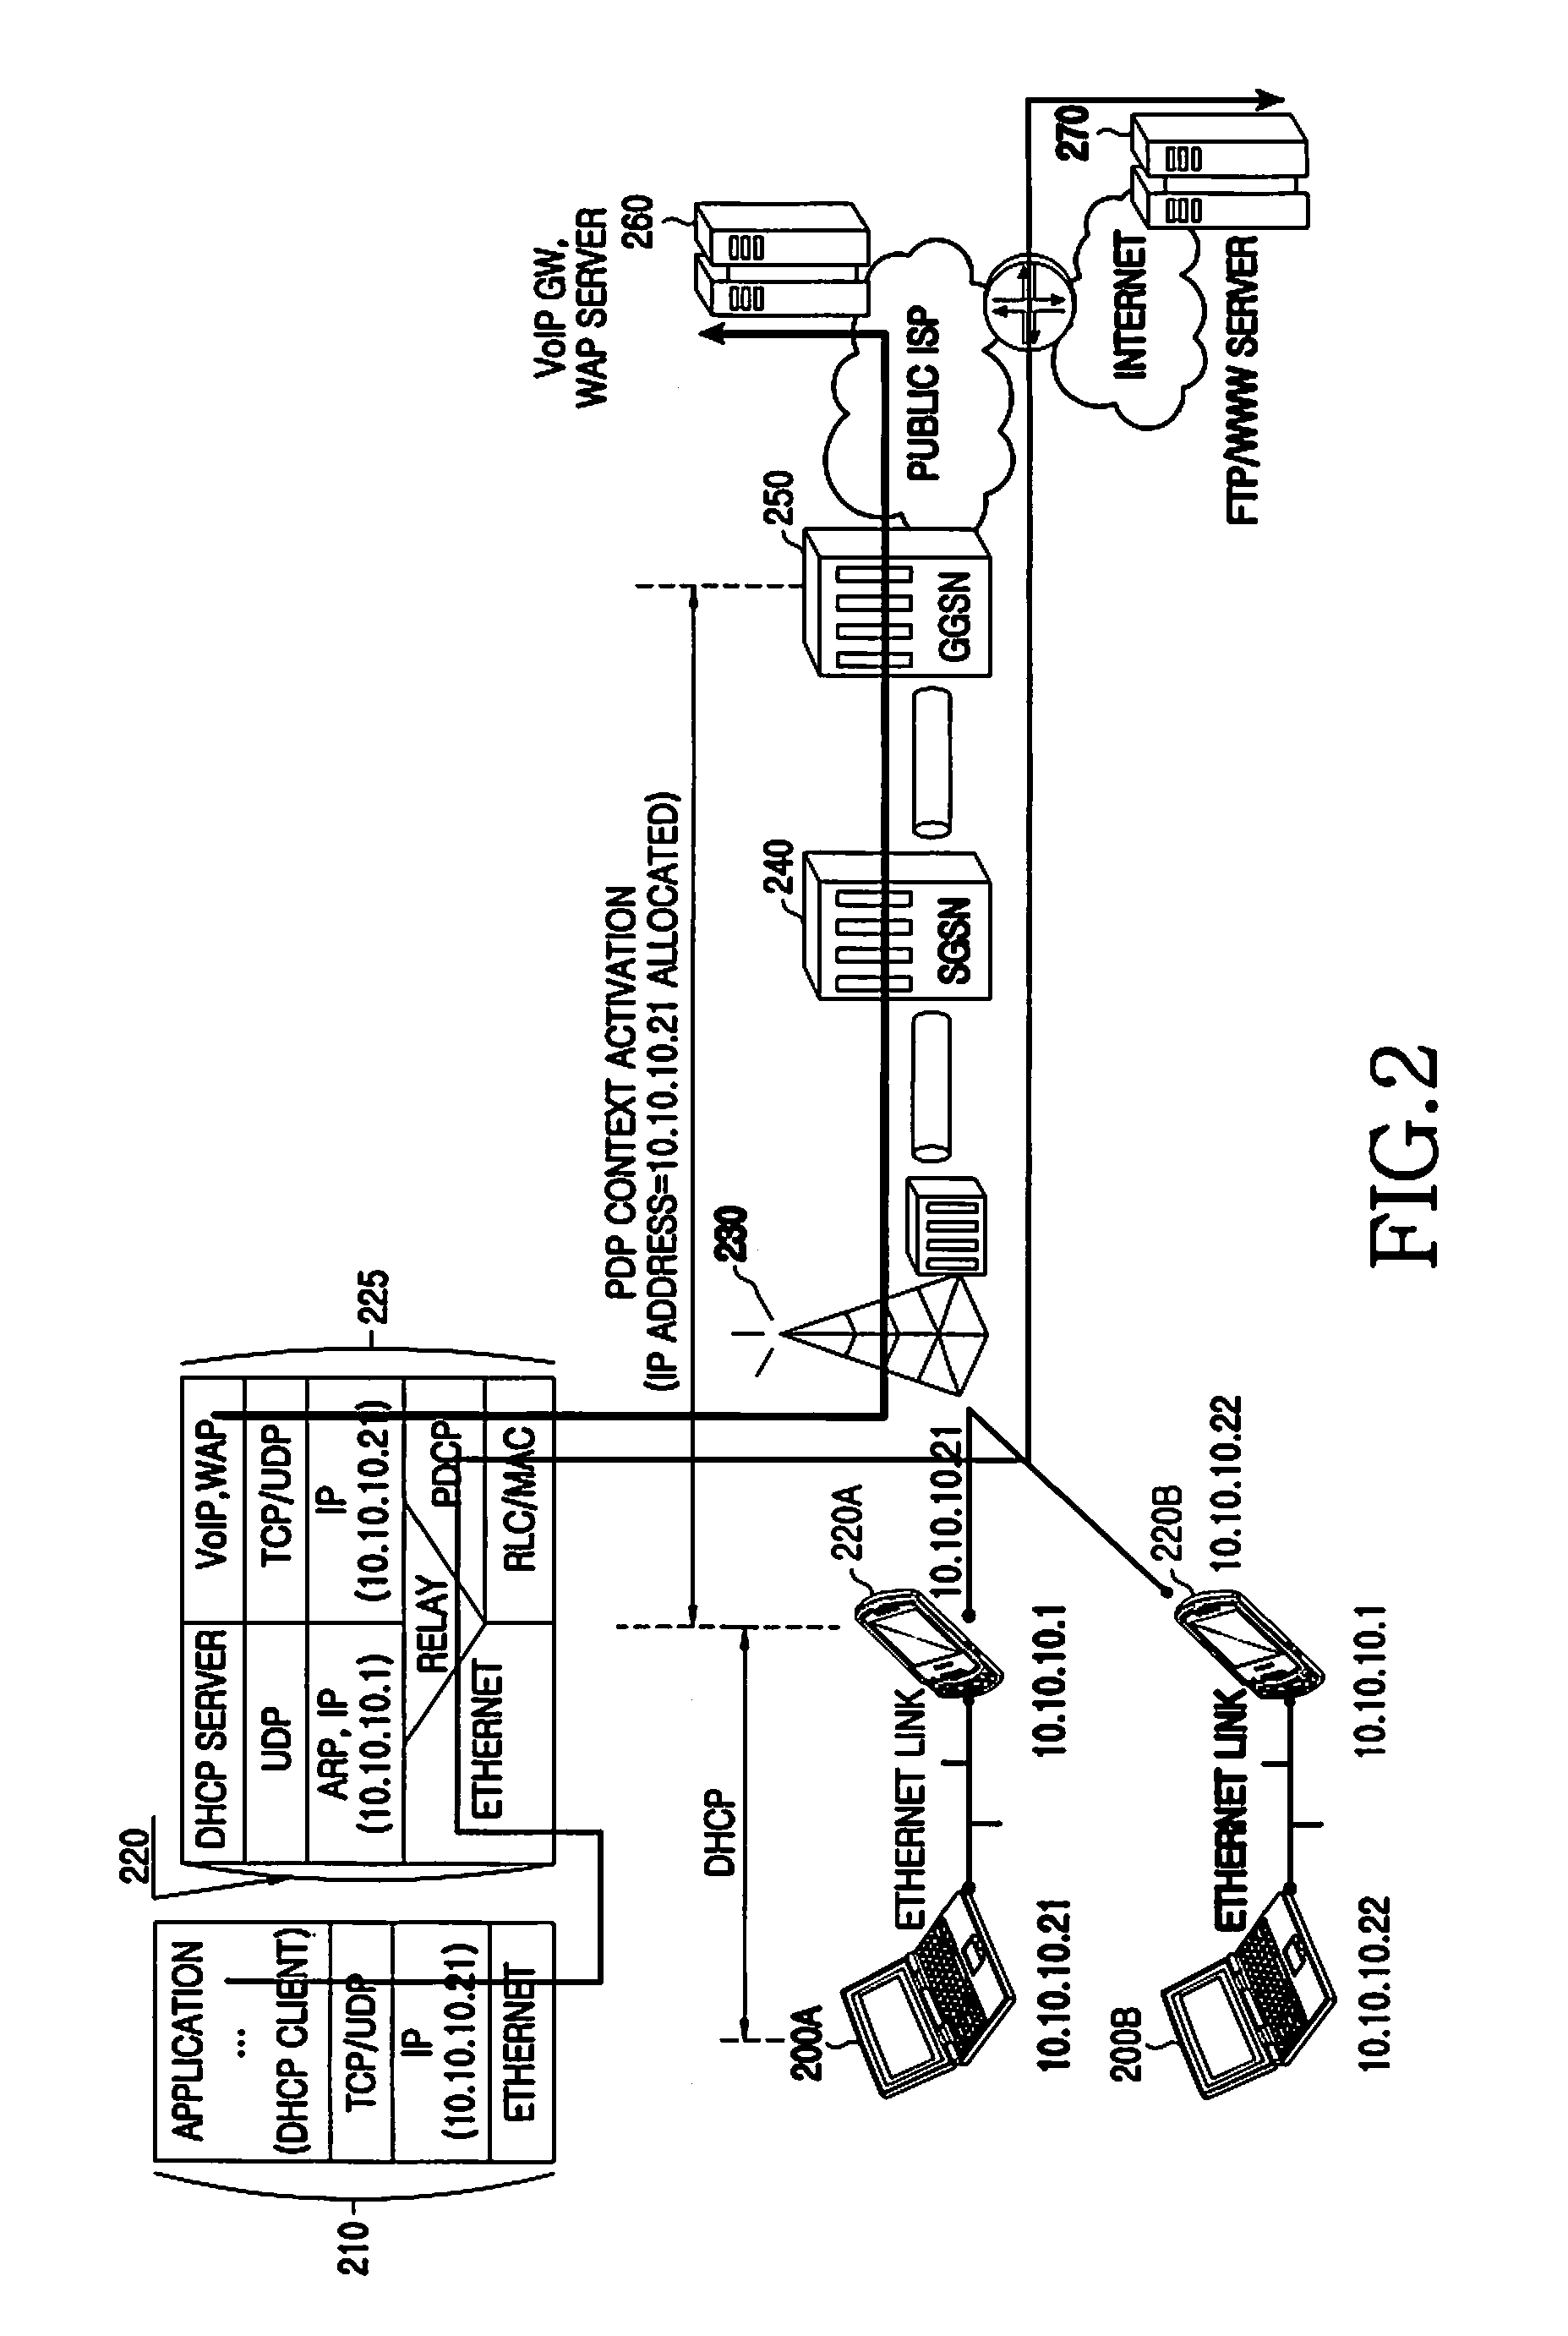 Apparatus and method for setting a default gateway address in a mobile communication system